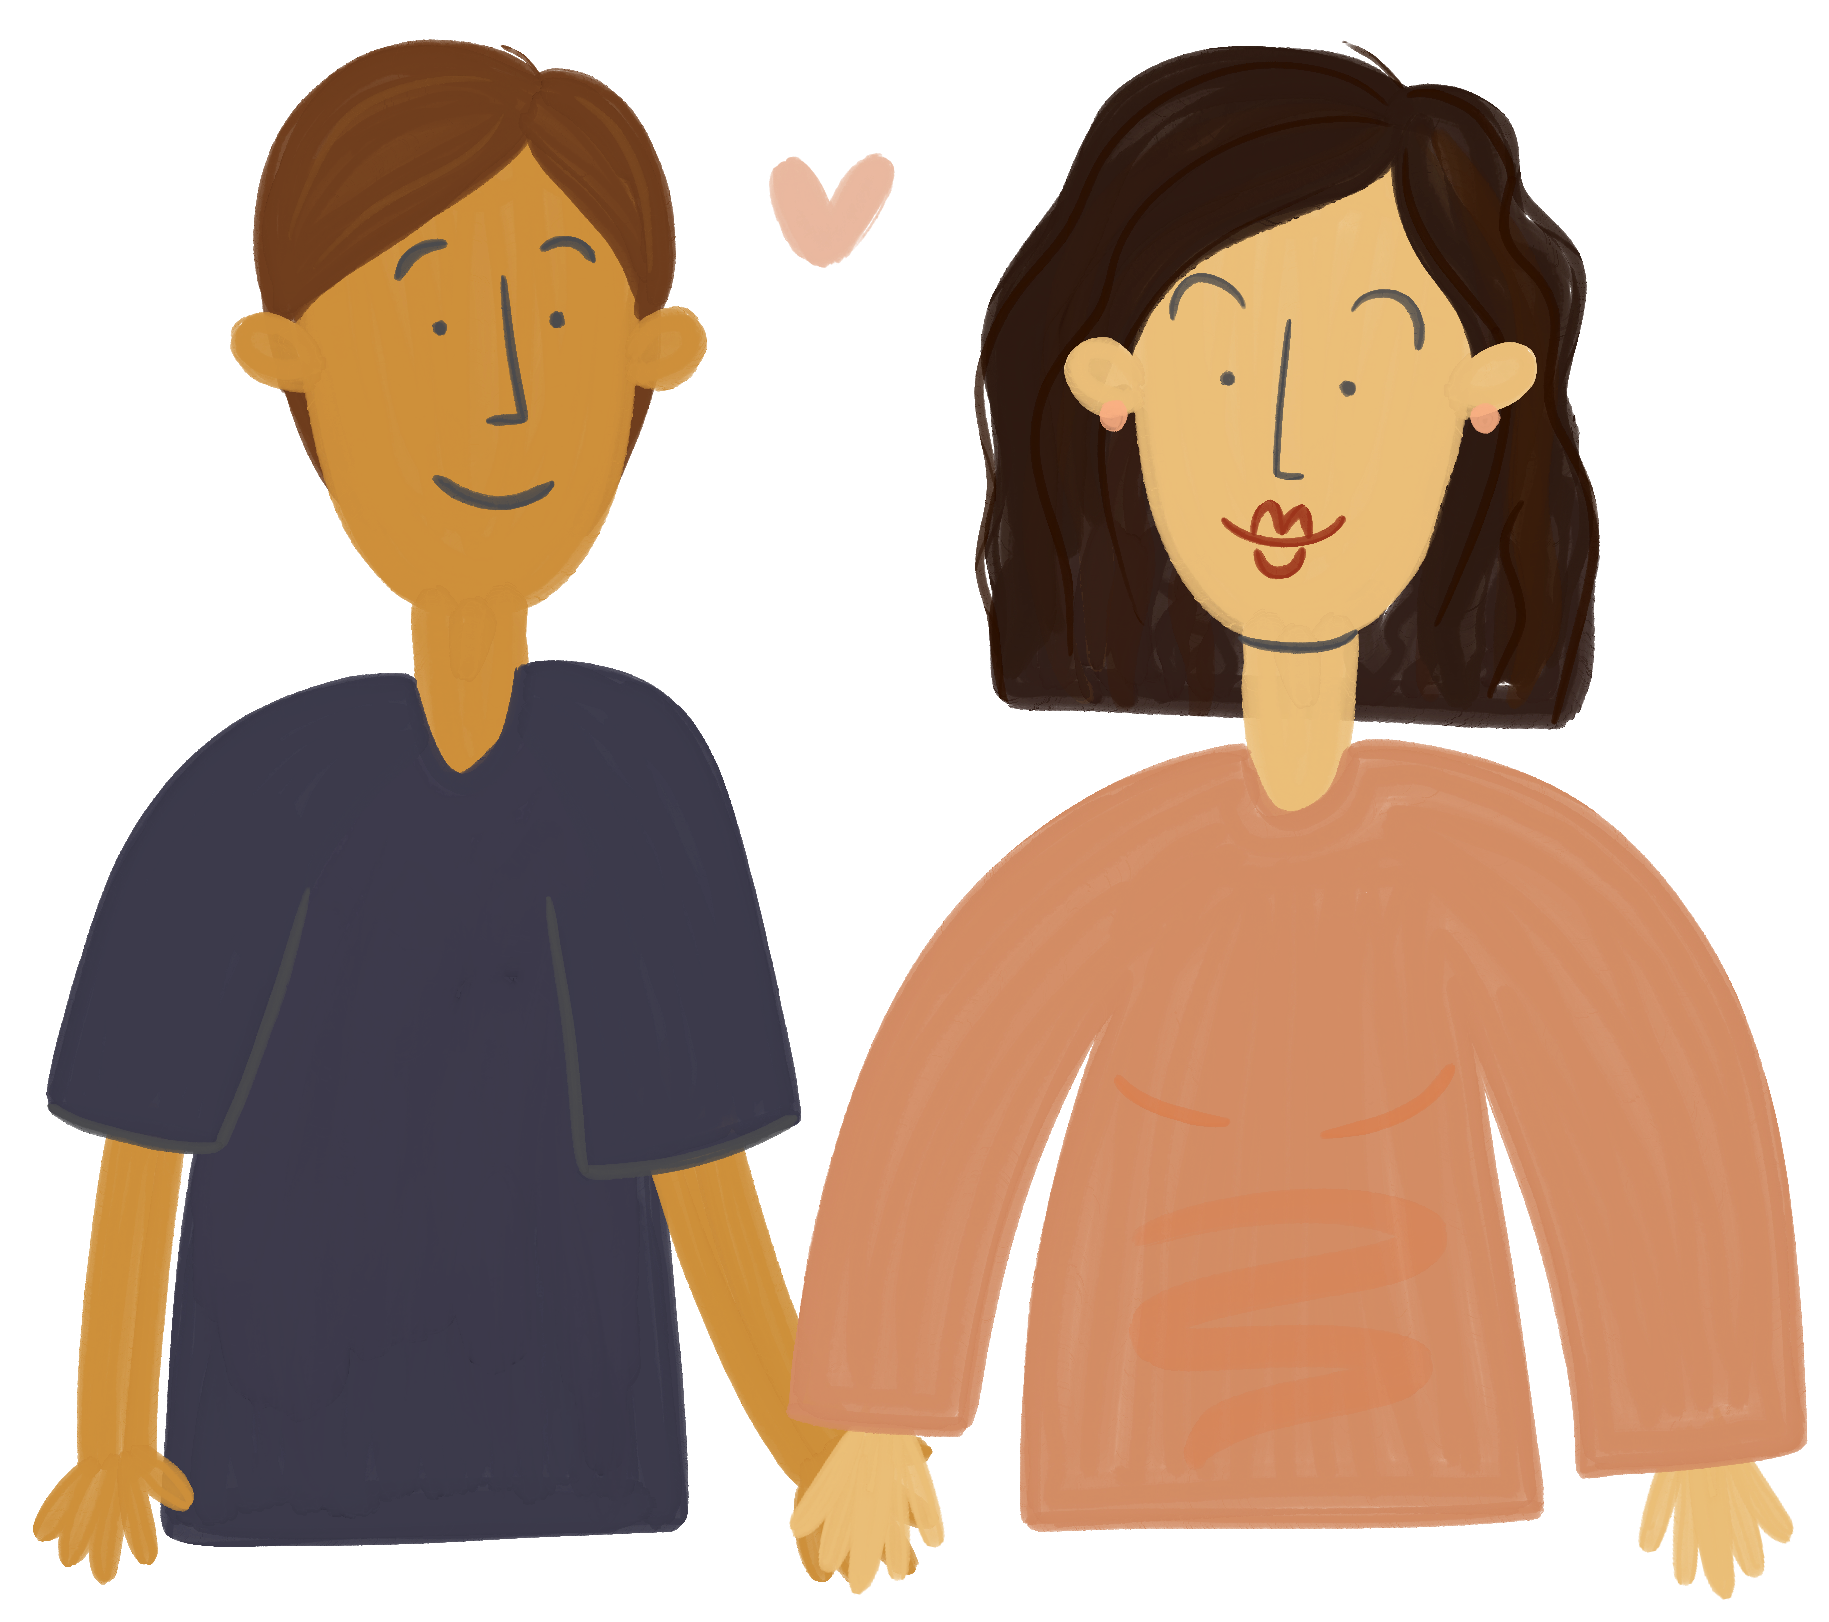 illustration of a man and woman holding hands